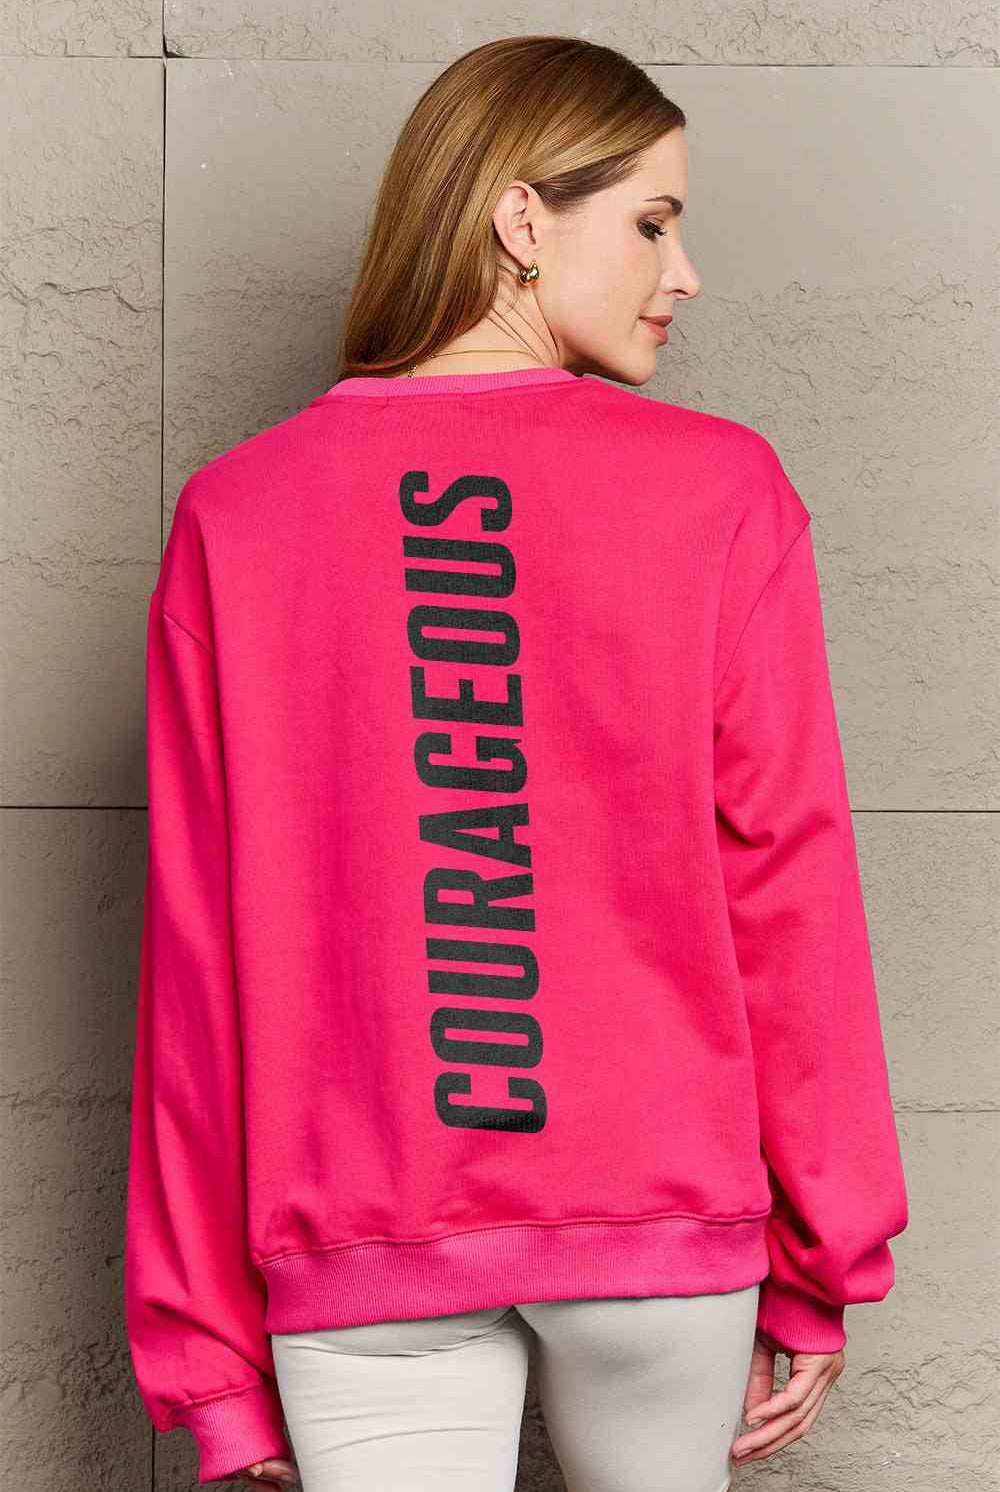 Simply Love Full Size COURAGEOUS Graphic Sweatshirt - GemThreads Boutique